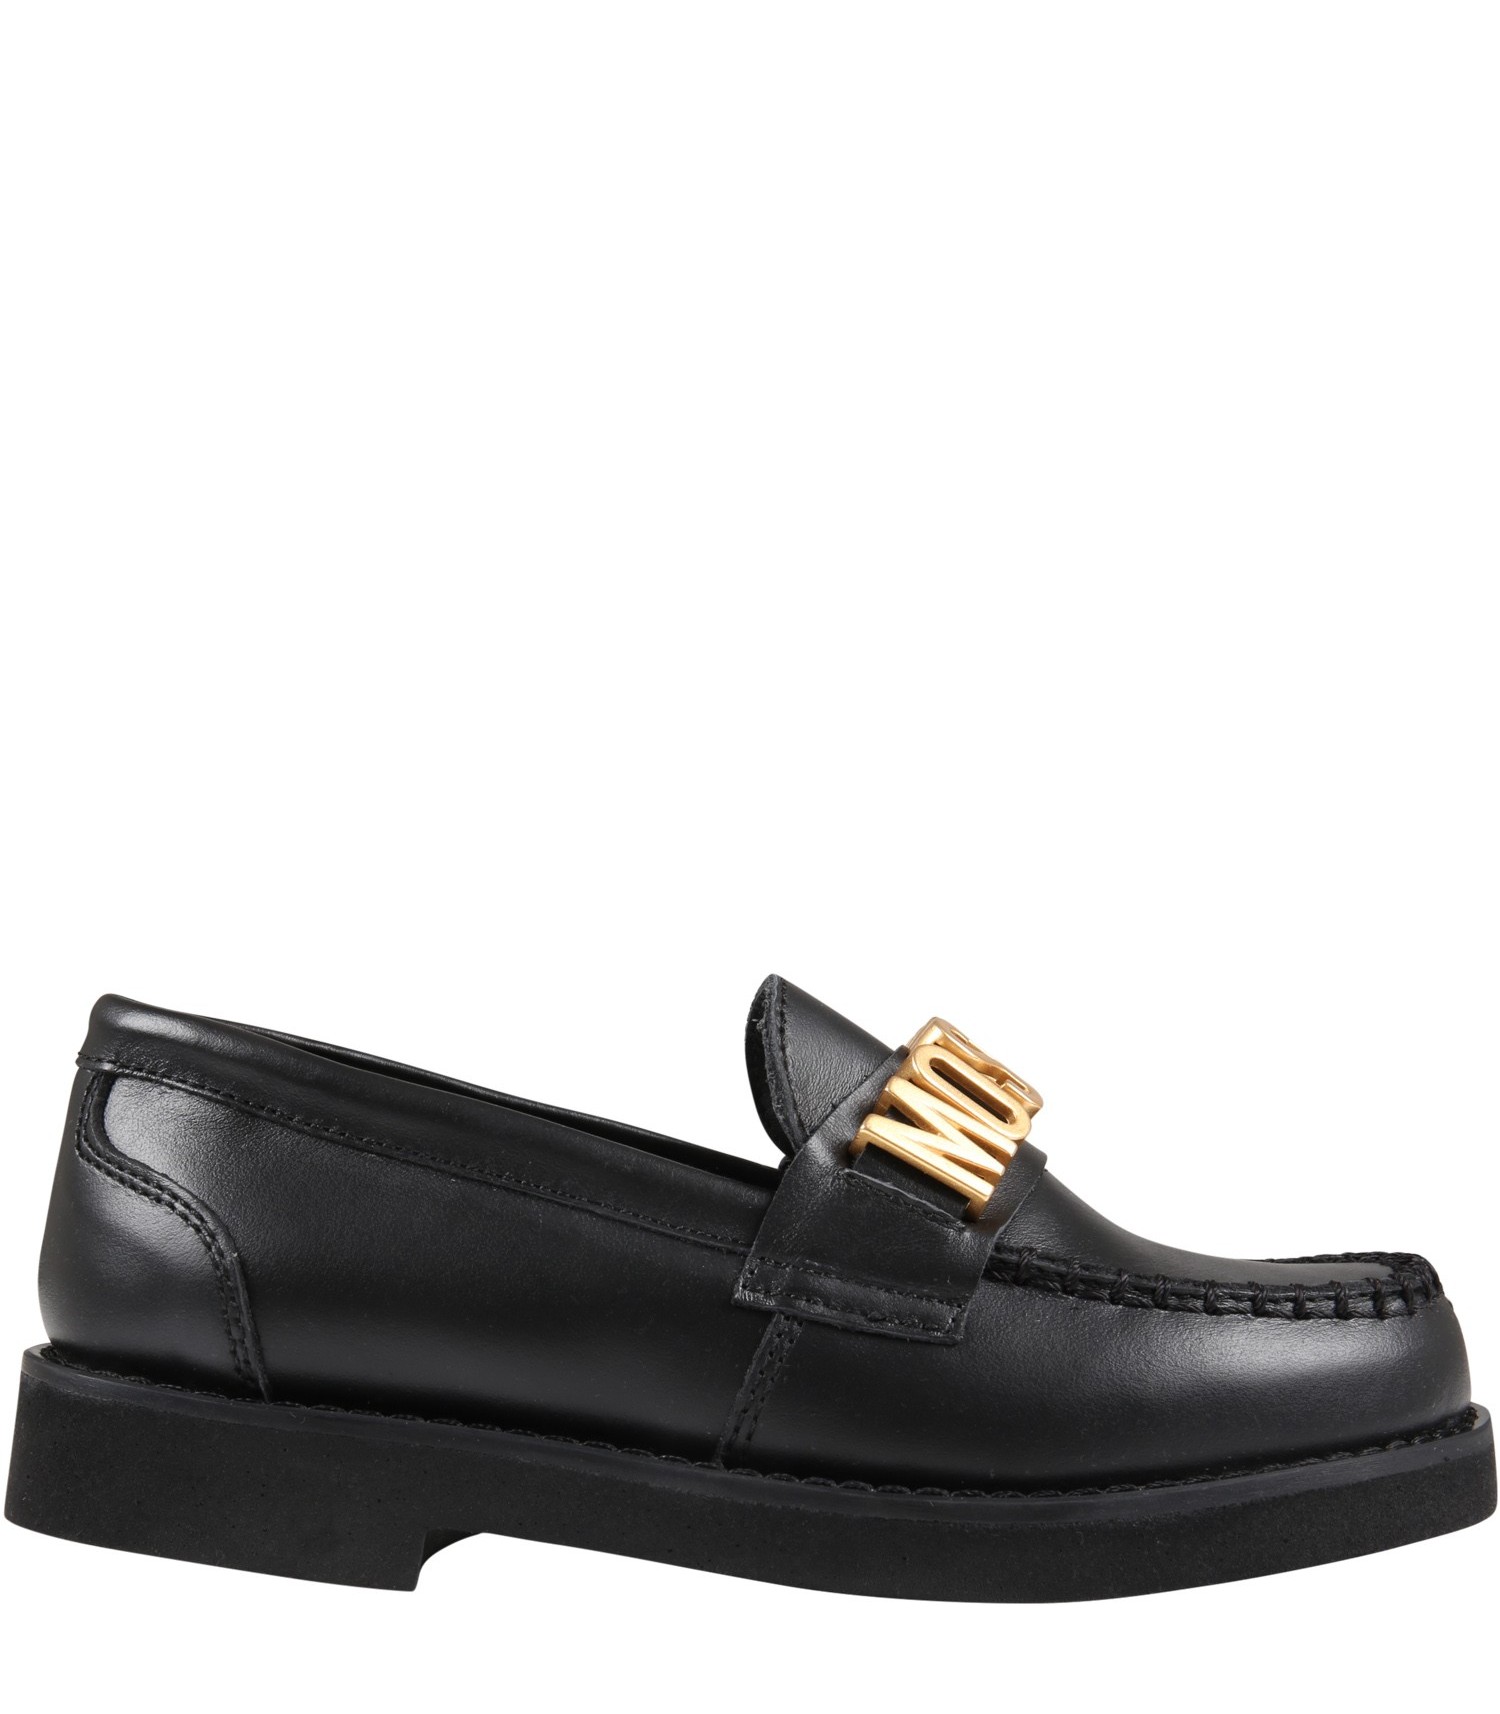 Moschino Kids Black loafers for kids